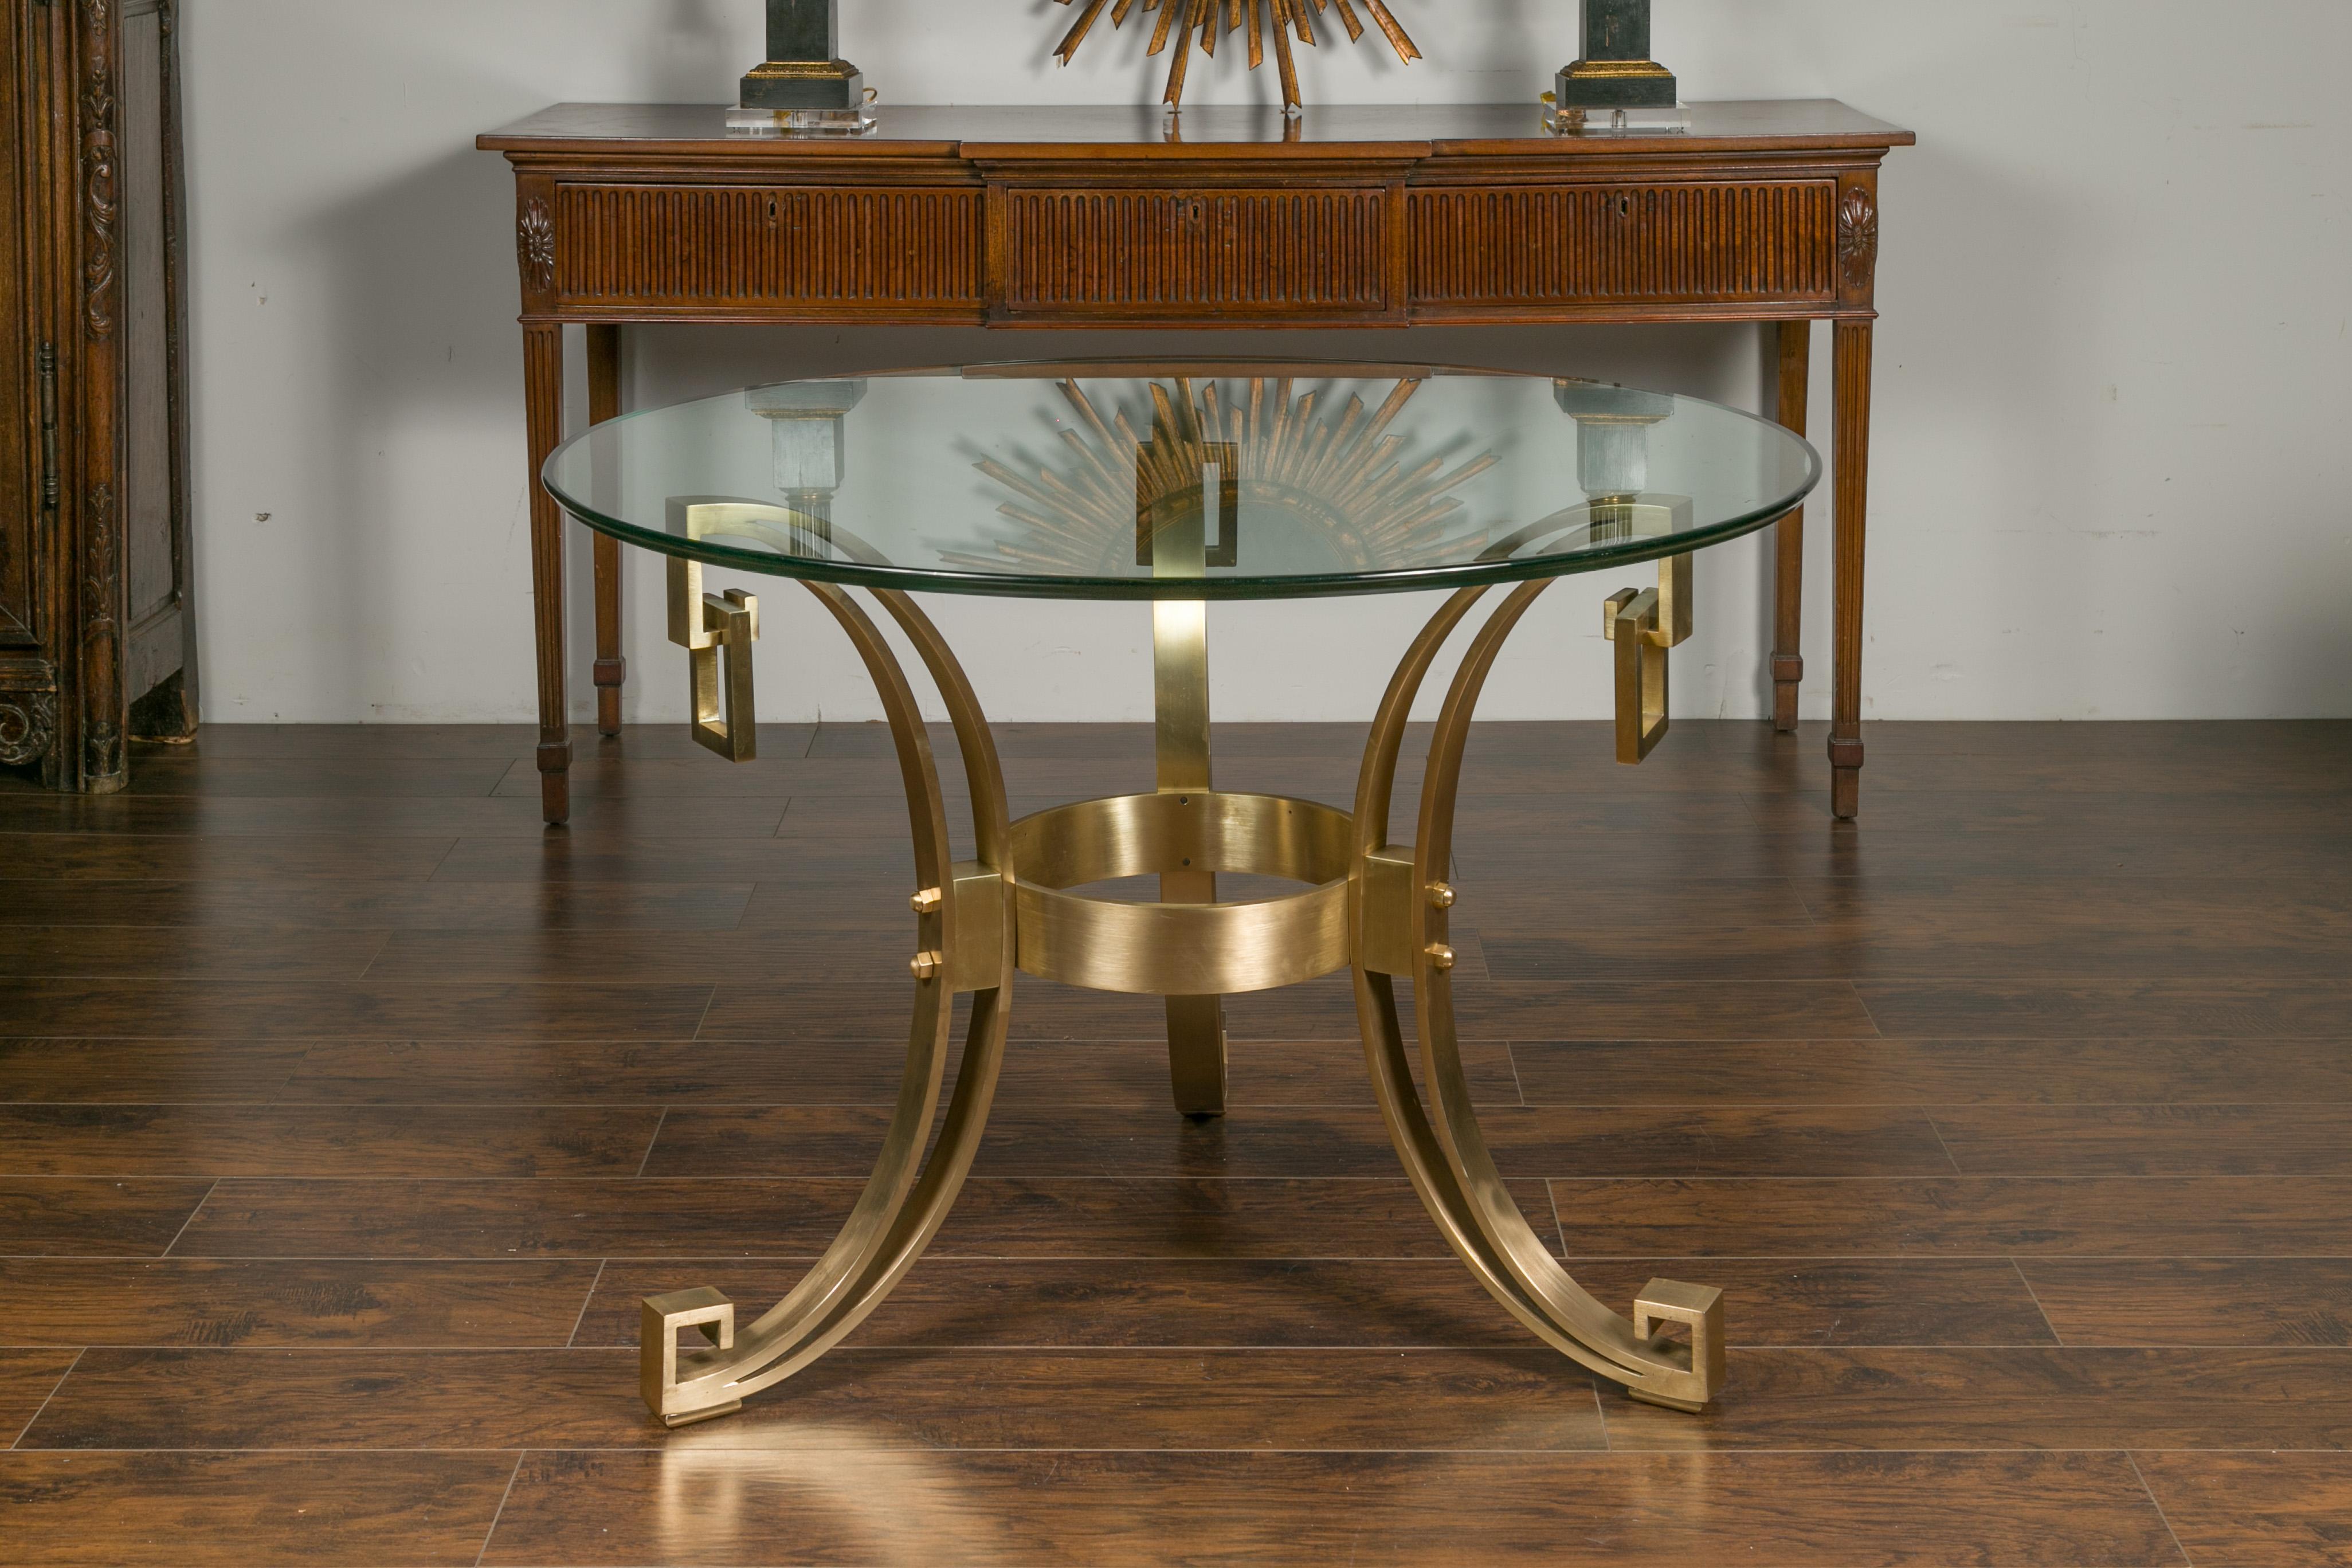 An Italian vintage Art Deco style bronze center table from the mid-20th century, with glass round top. Created in Italy during the midcentury period, this center table attracts all of our attention with its Art Deco style silhouette. A circular